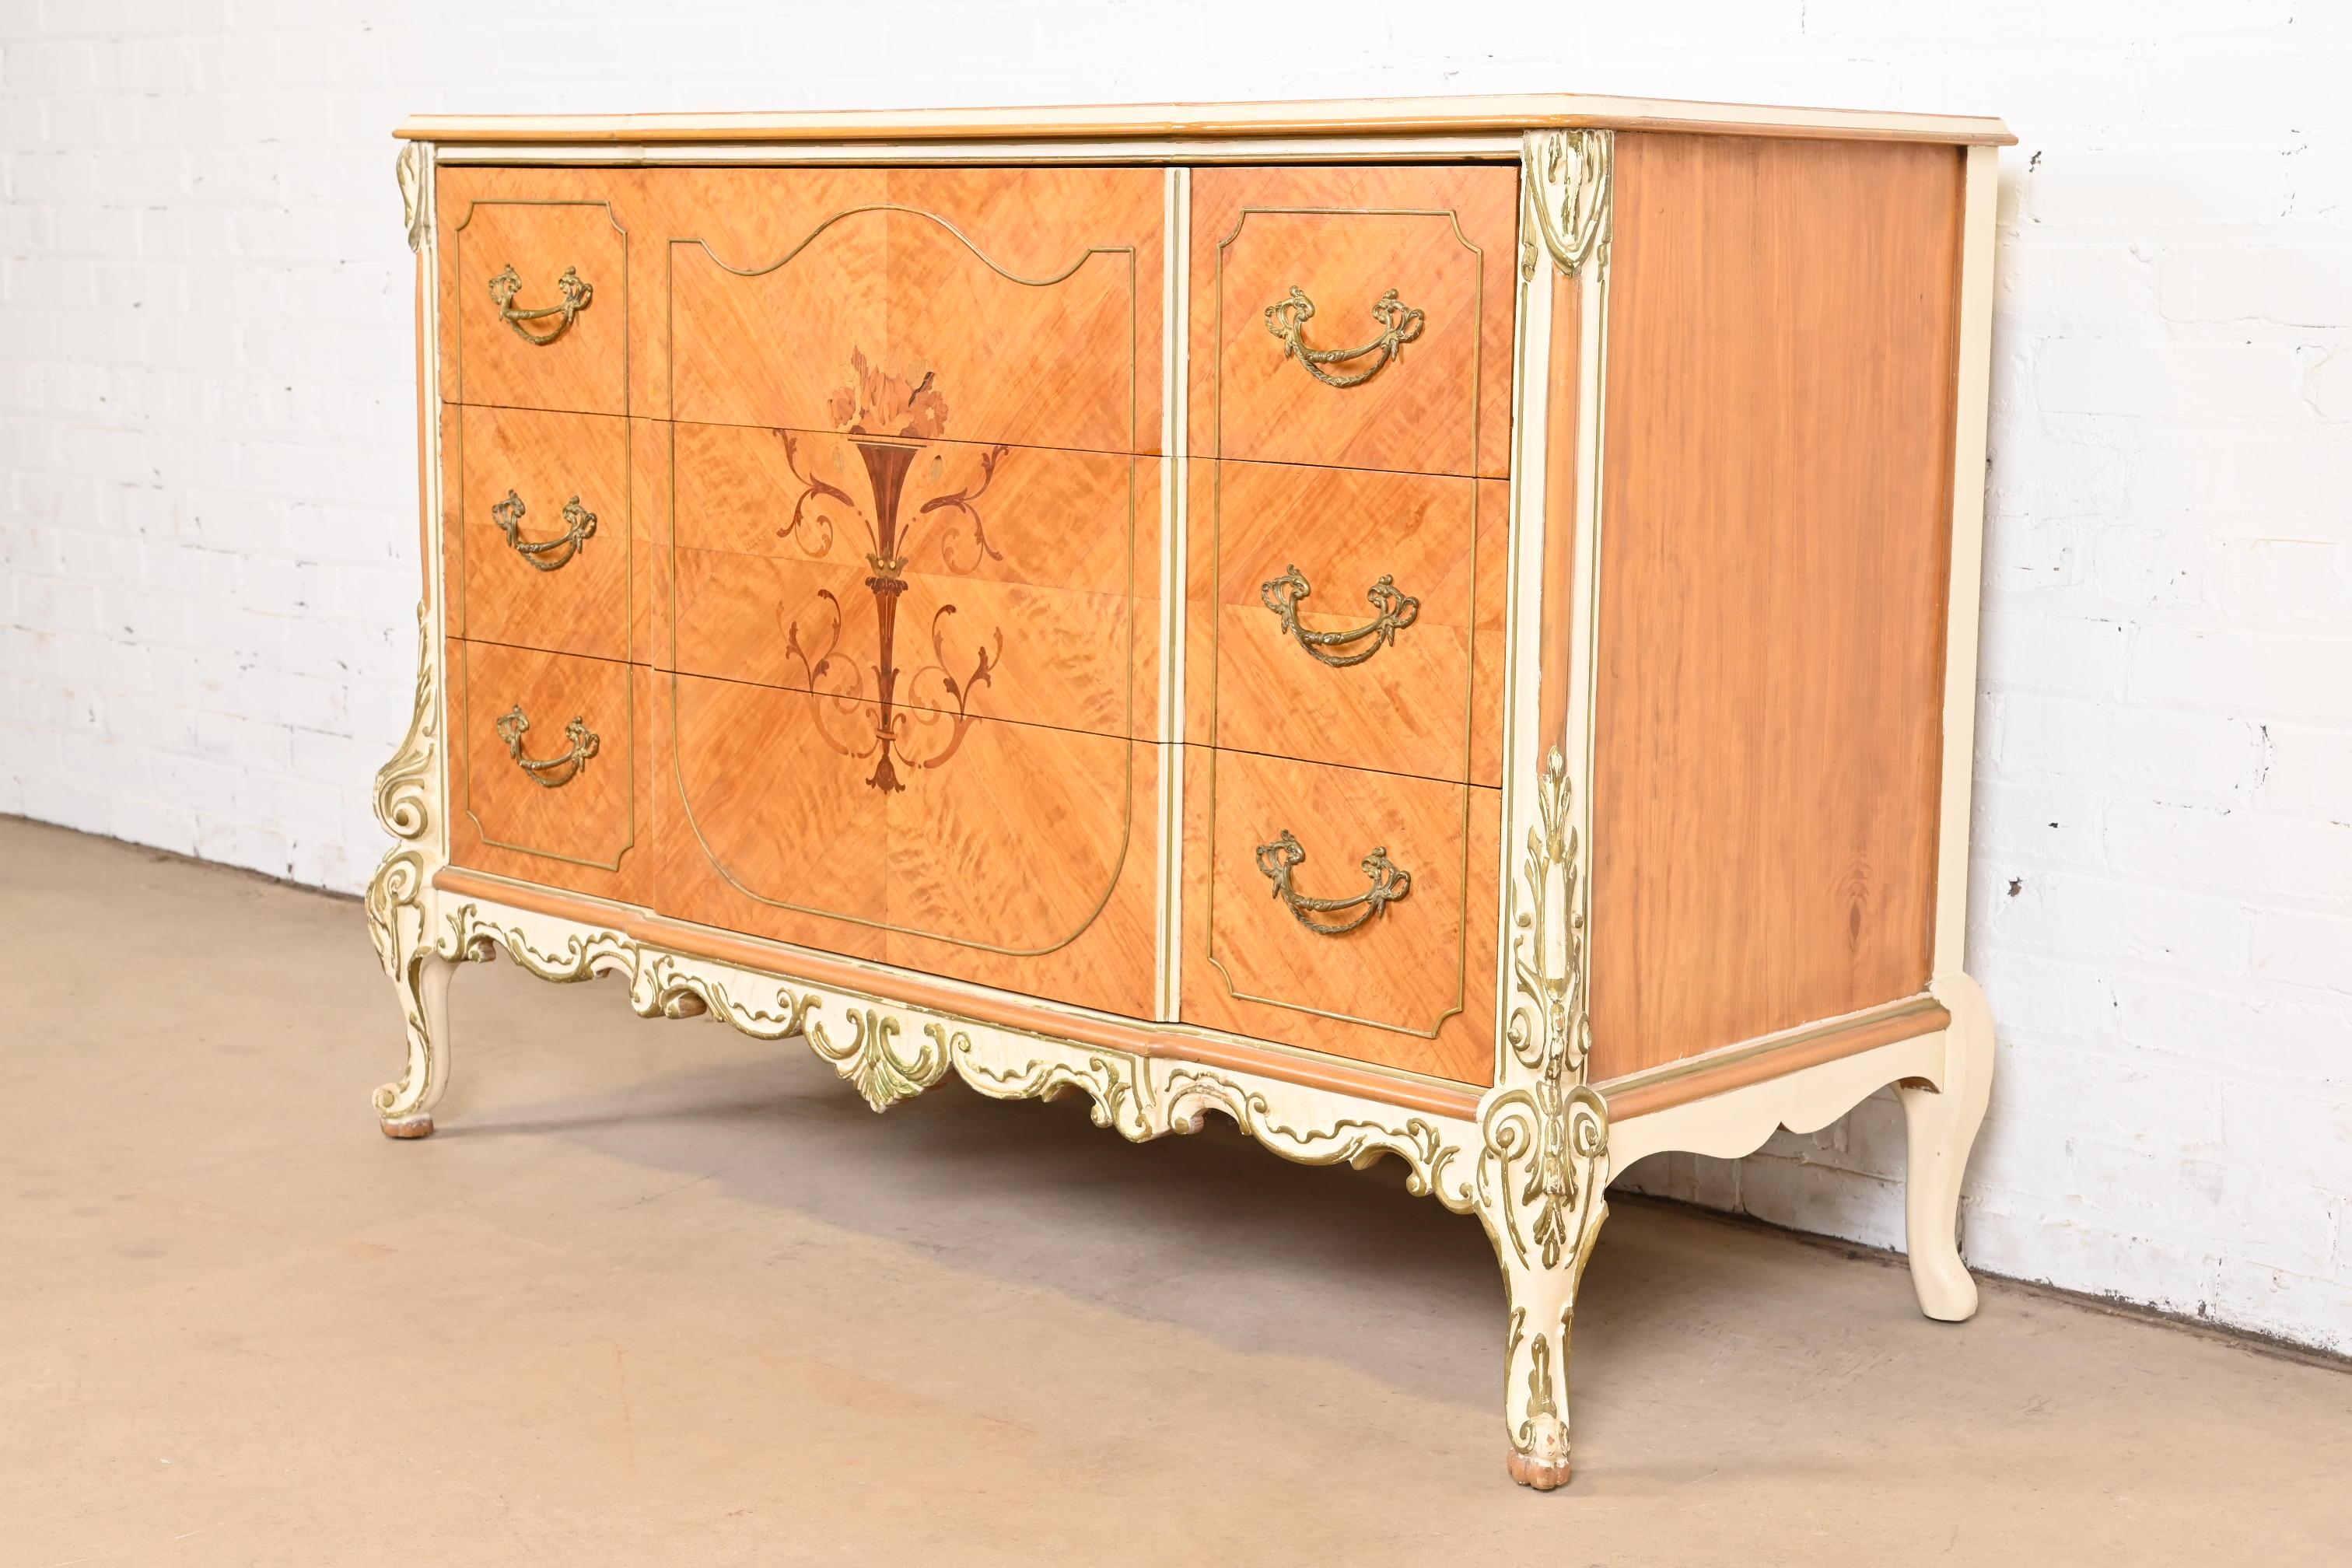 American Romweber French Rococo Satinwood Inlaid Marquetry Parcel Painted Dresser, 1930s For Sale